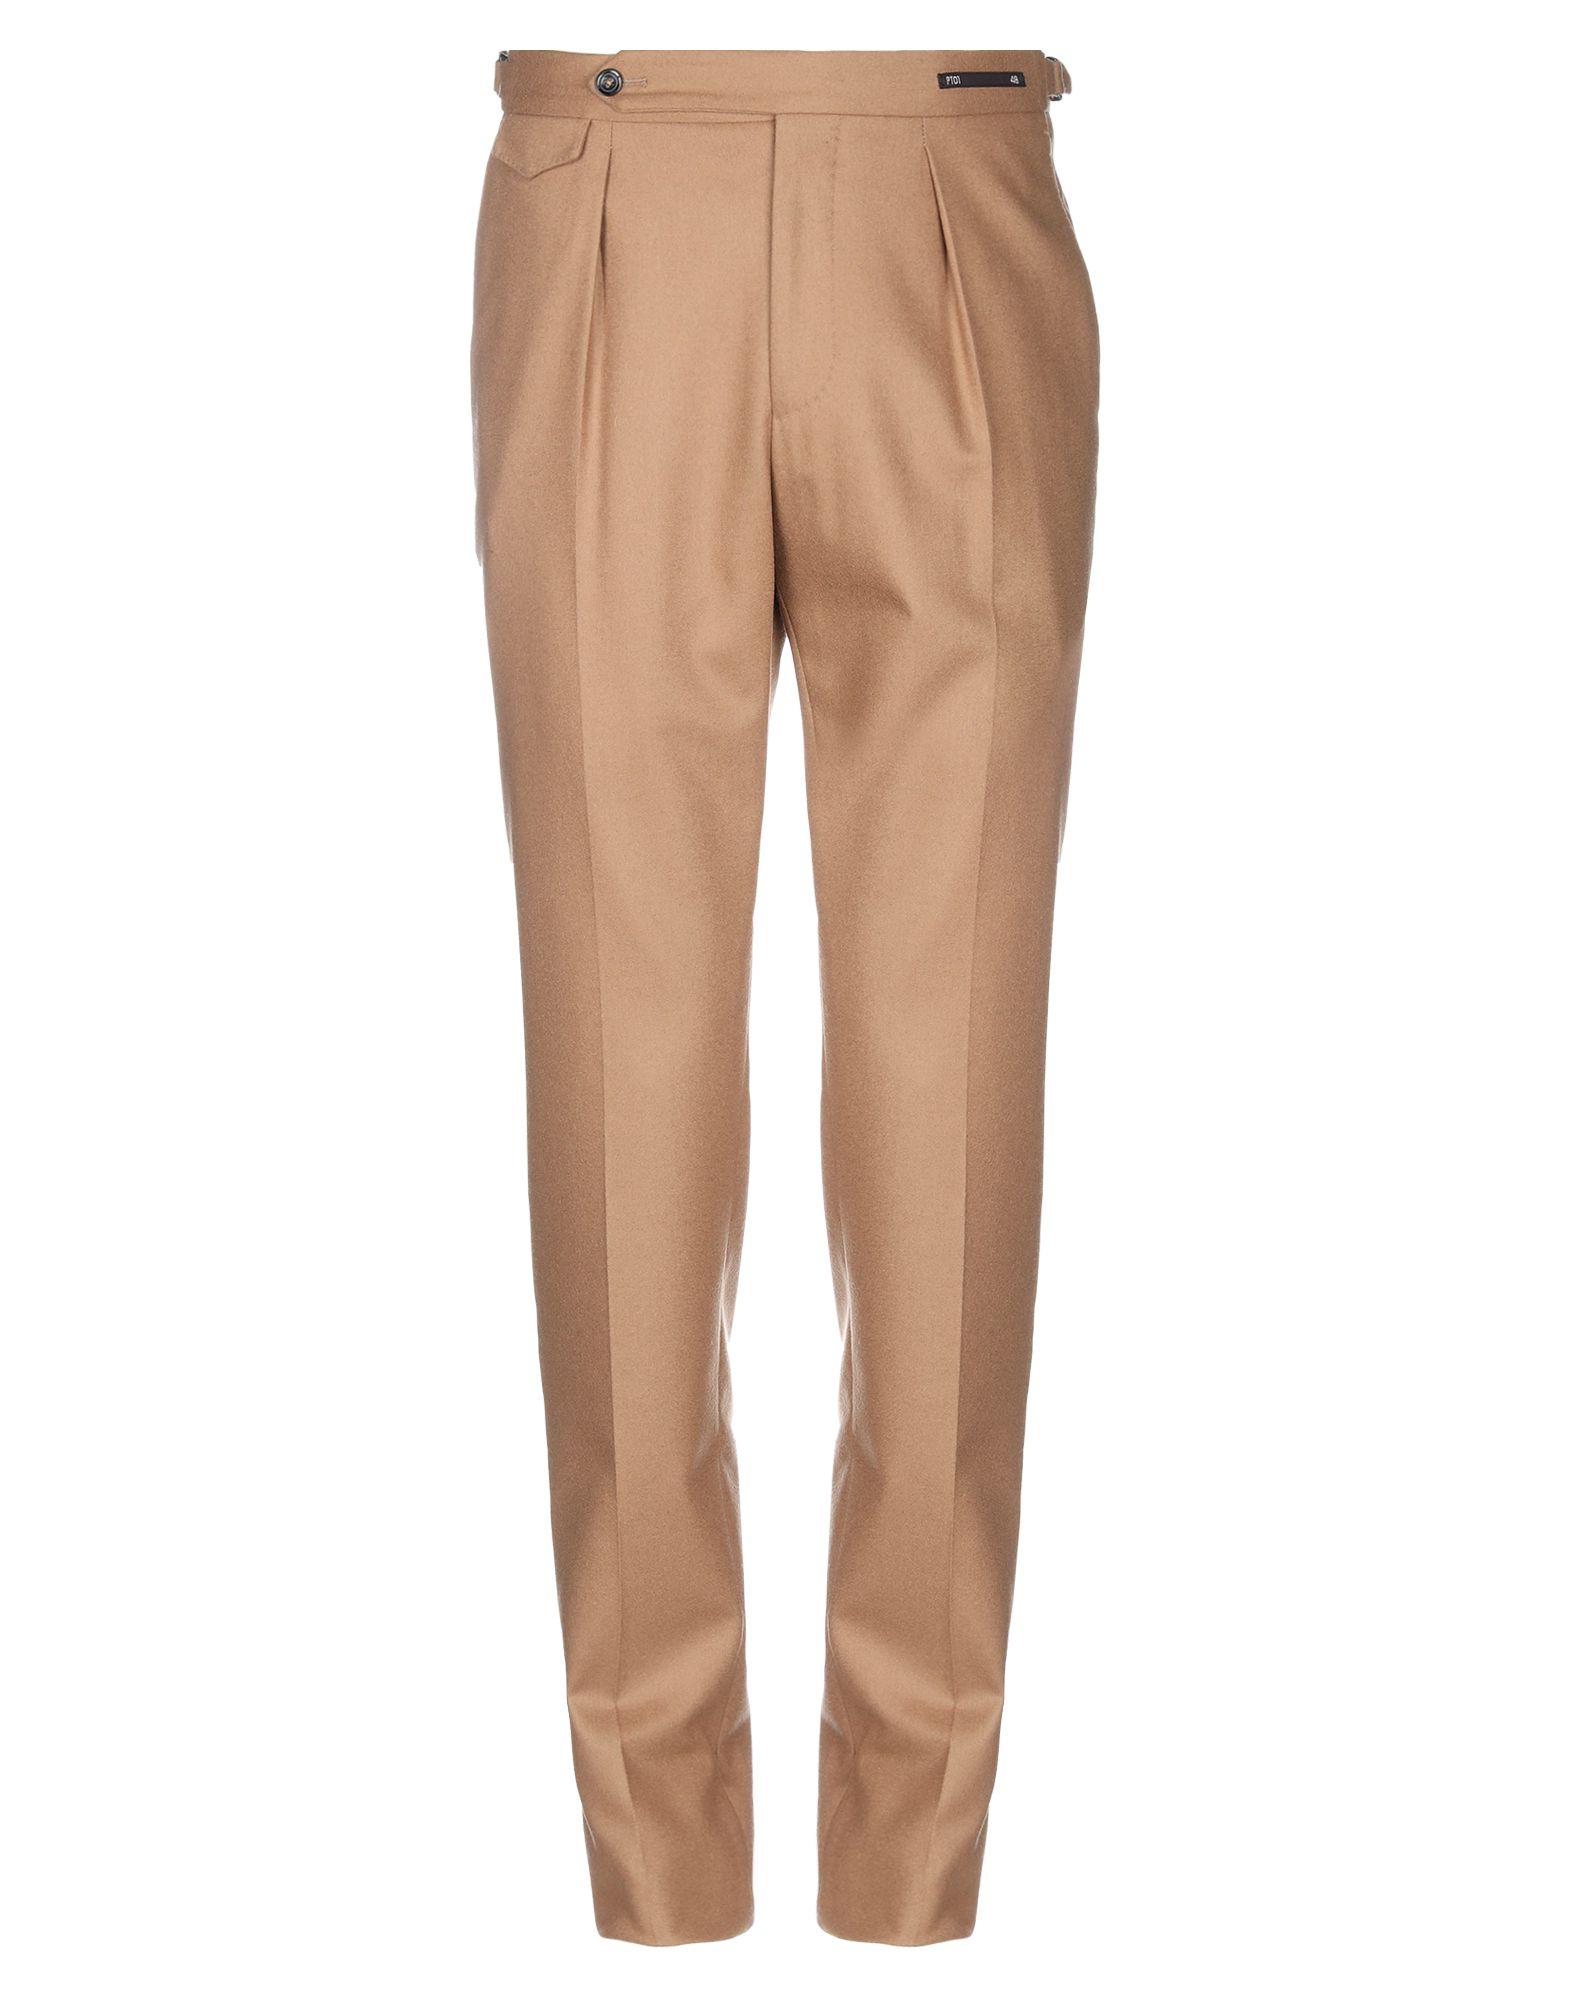 PT01 Flannel Casual Pants in Light Brown (Brown) for Men - Lyst